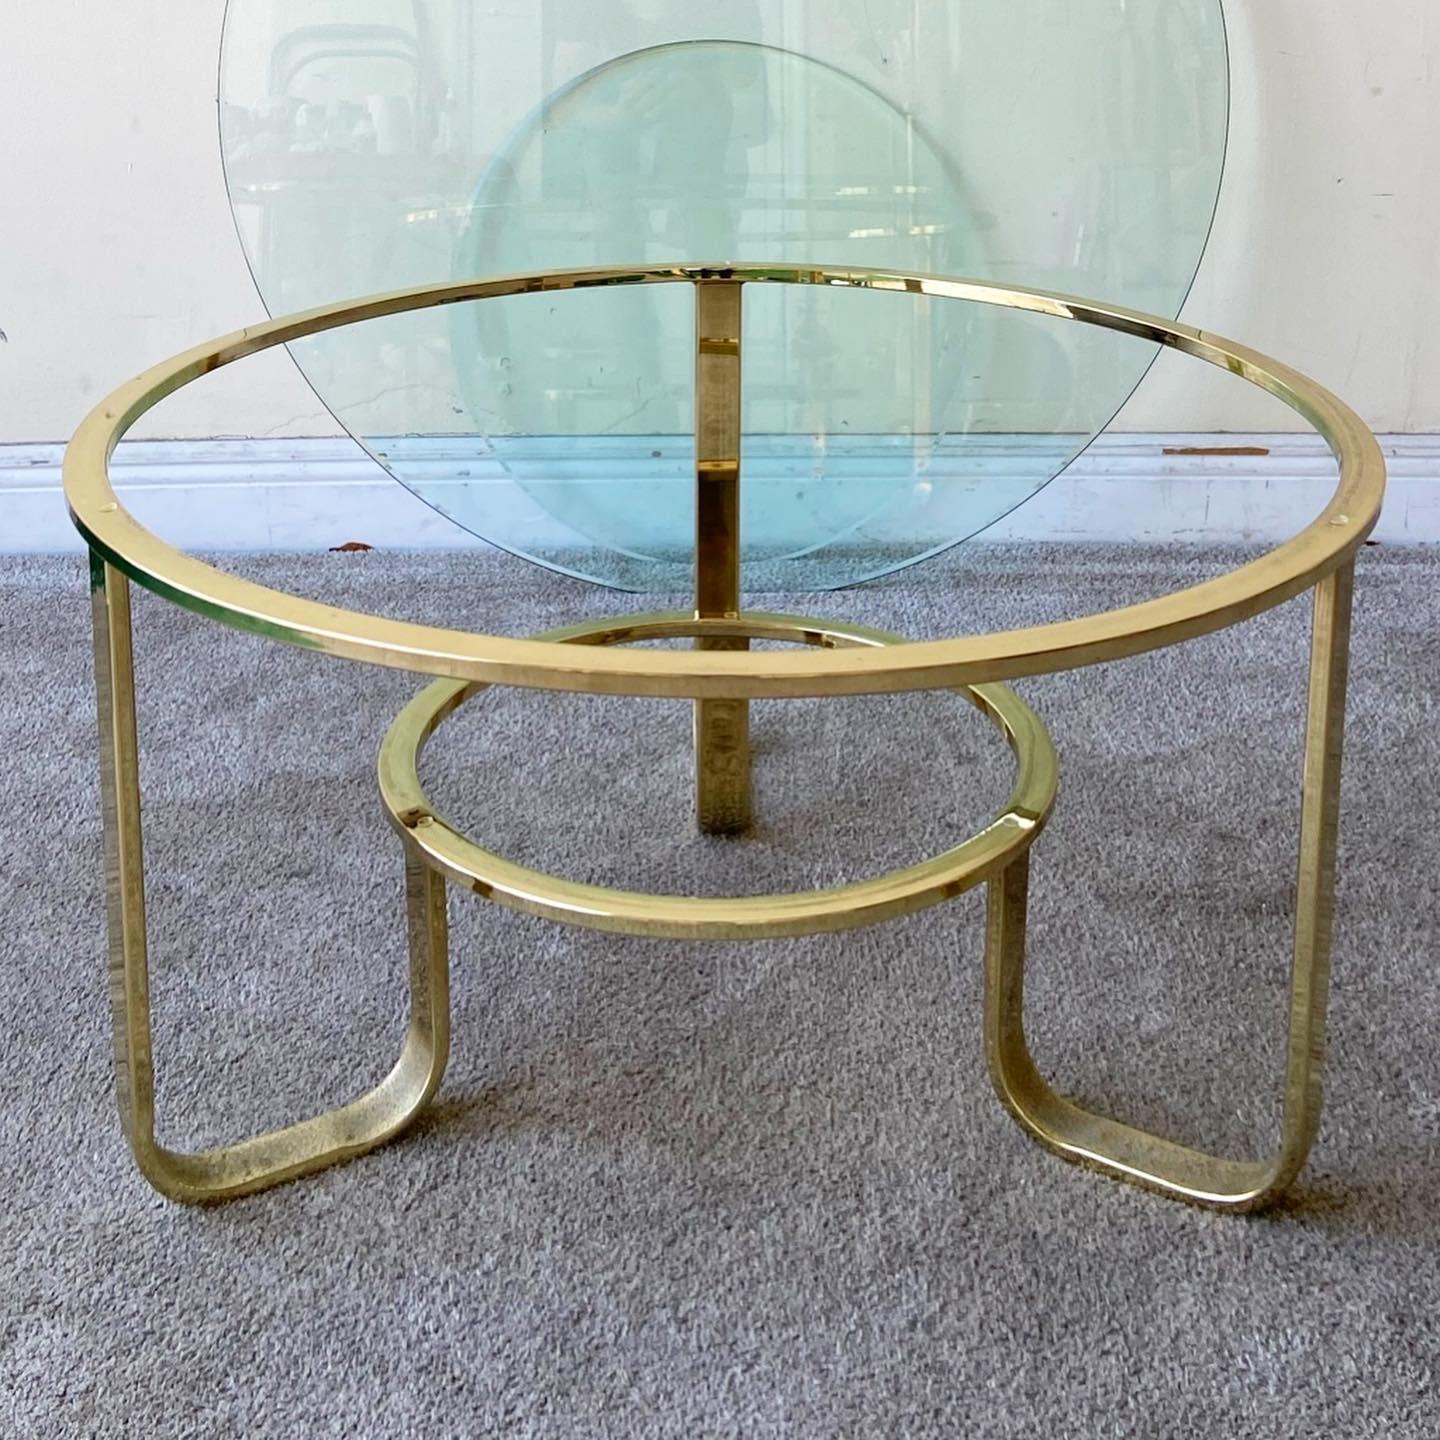 Amazing Mid-Century Modern two tier circular coffee table. Features a gold frame a two circular glass tops.
 